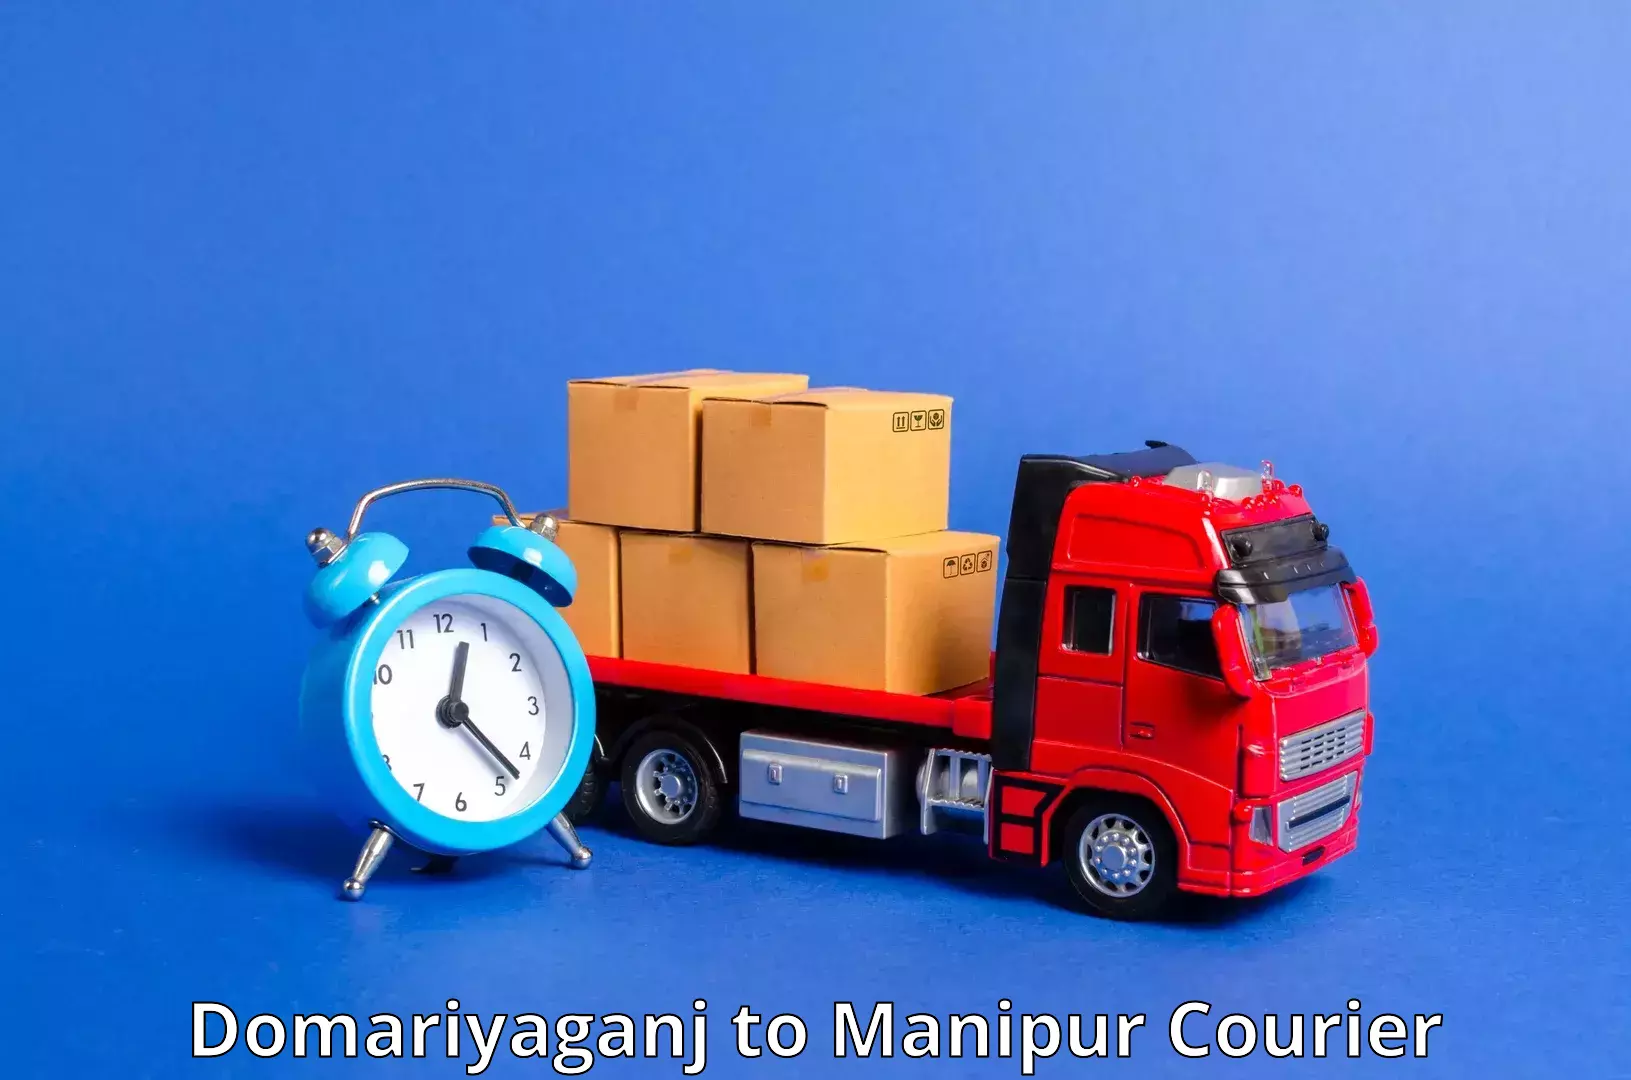 24-hour delivery options Domariyaganj to Manipur